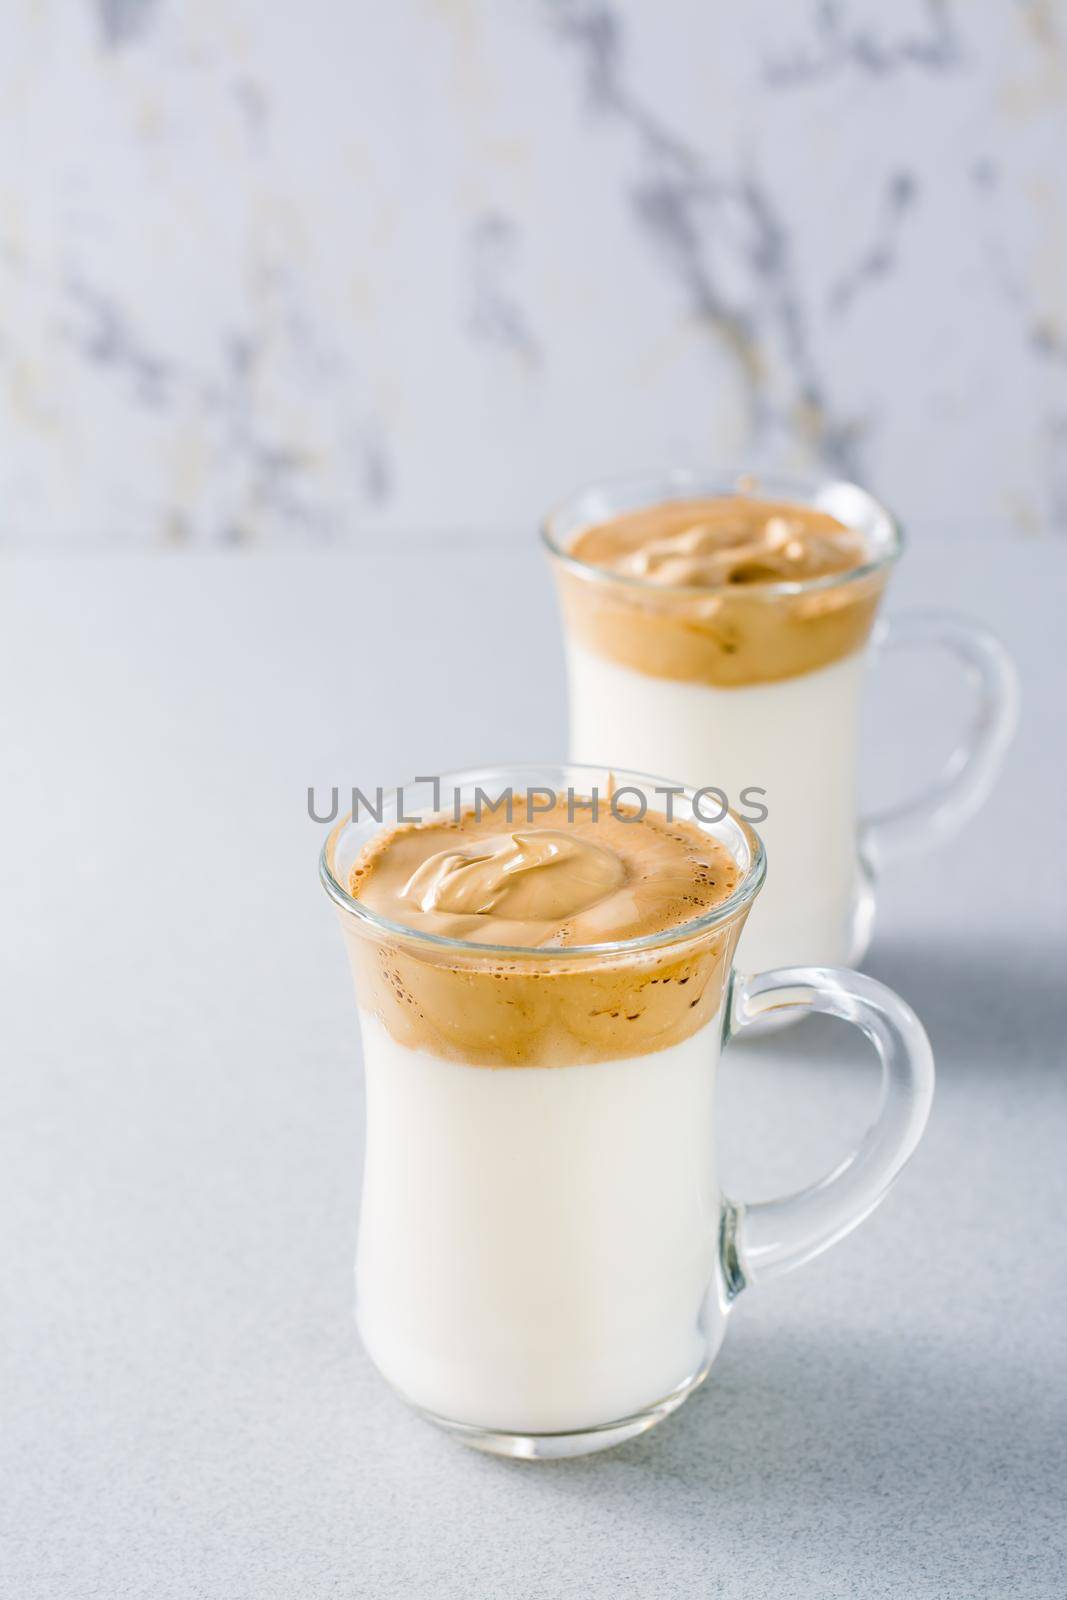 Quarantine trendy cuisine. Two cups with dalgona coffee on a gray background. Vertical view